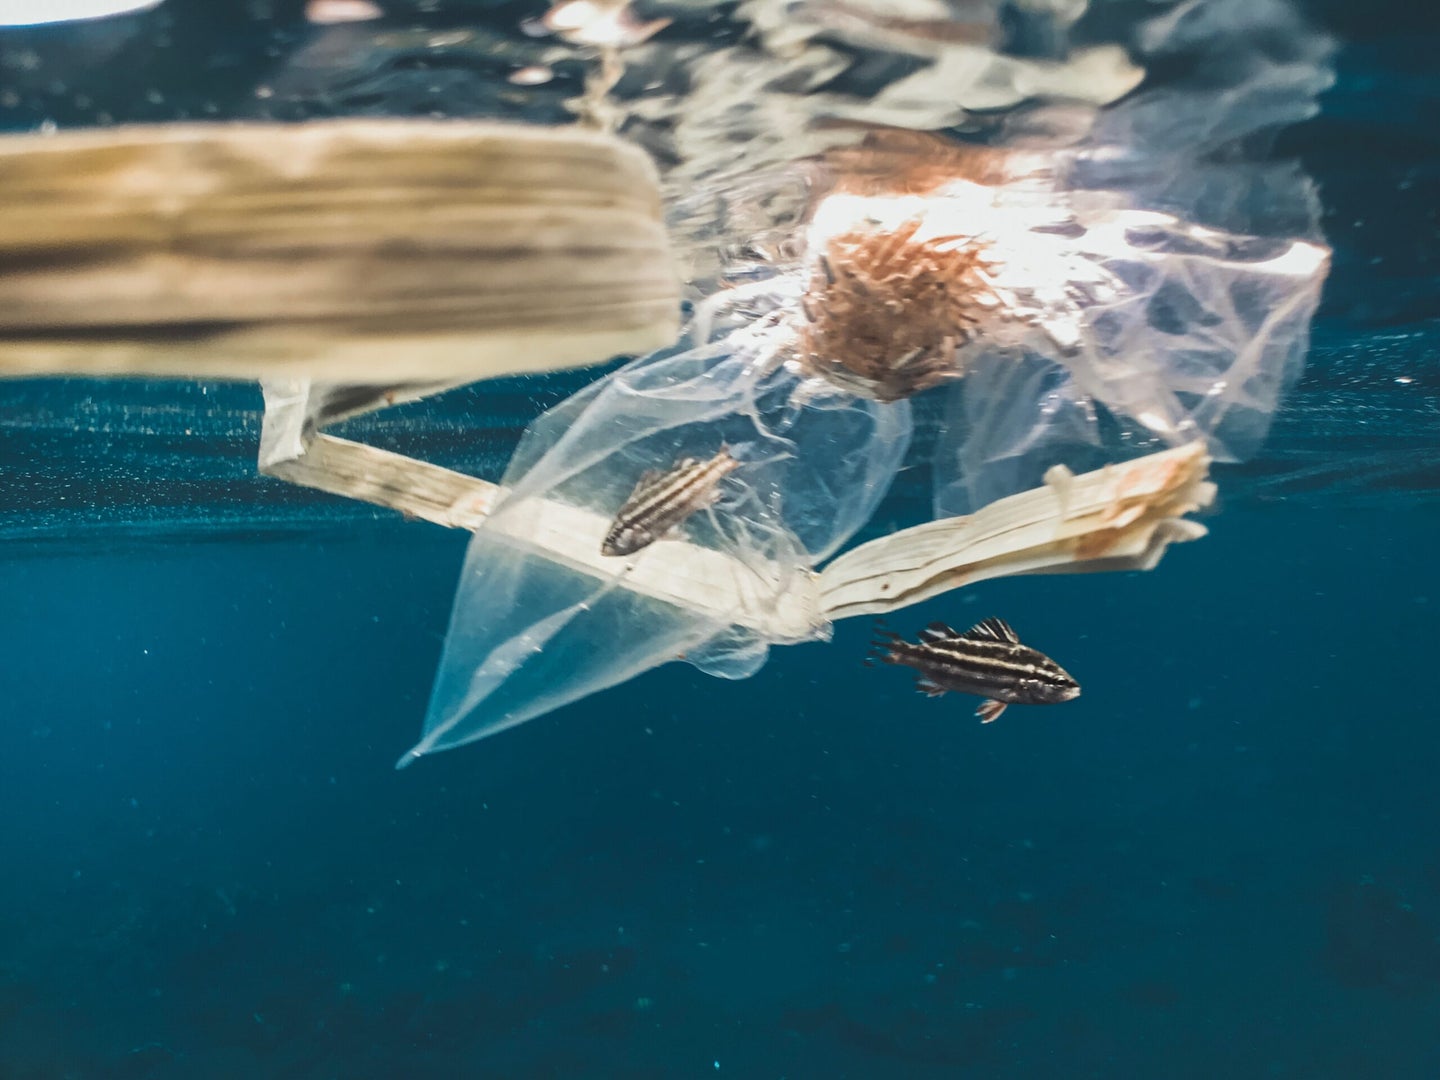 Cleaning up plastic is just one part of the ocean pollution dilemma. 